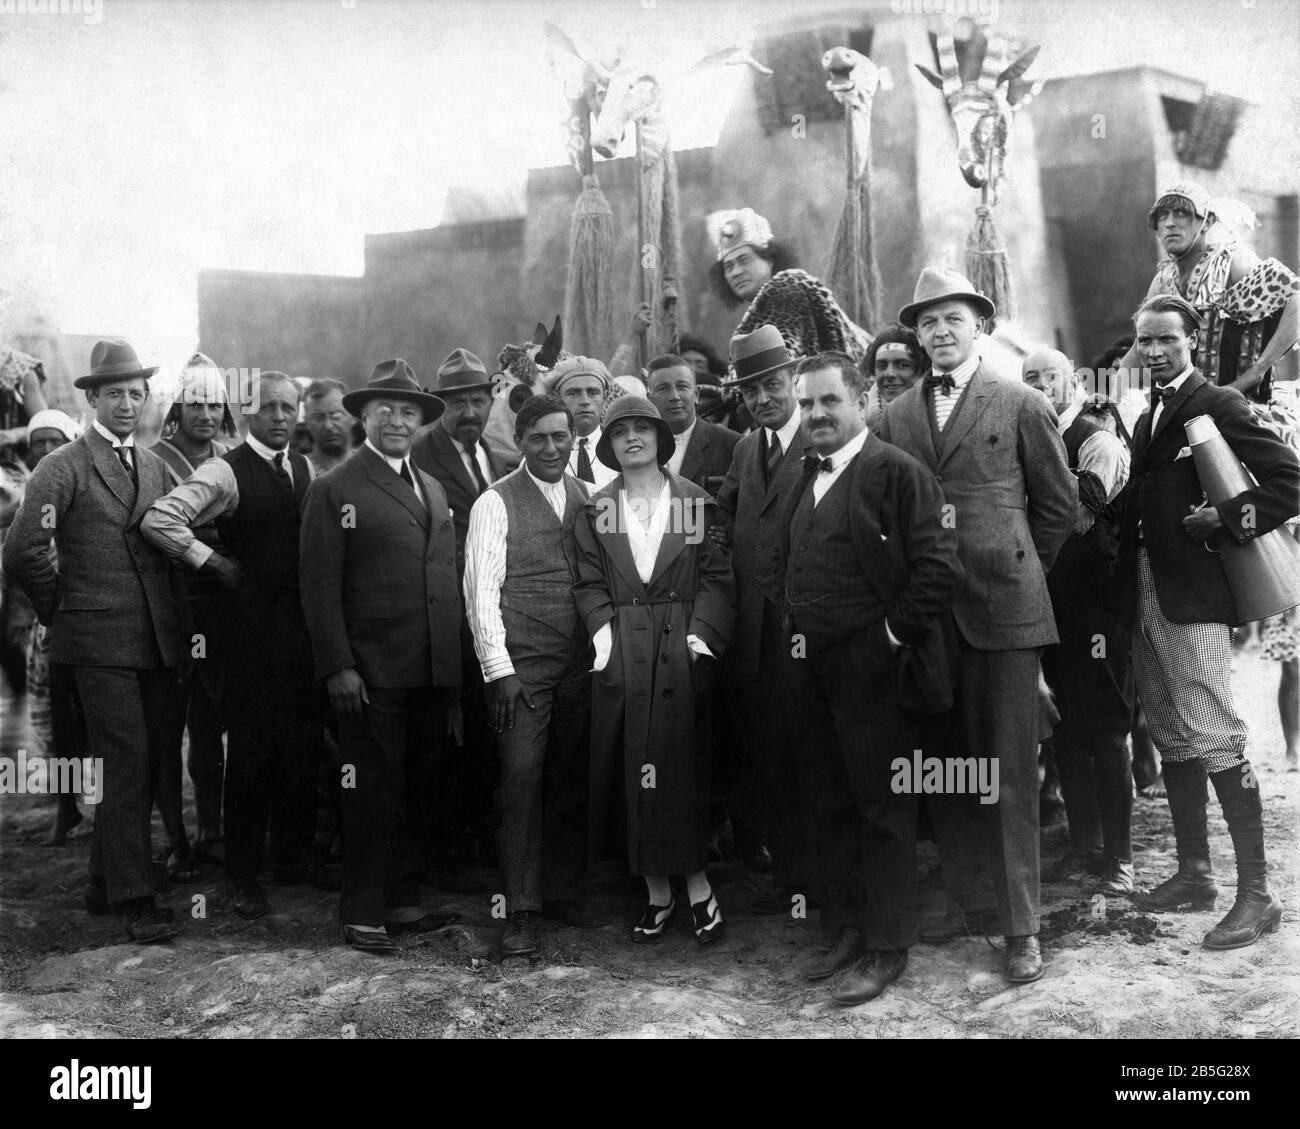 Director ERNST LUBITSCH with visitor POLA NEGRI and next to her Producer PAUL DAVIDSON with behind PAUL WEGENER in costume as Samlak at E.F.A. Studios in Berlin during filming of DAS WEISS DES PHARAO aka THE LOVES OF PHARAOH 1922 co-production of Ernst Lubitsch - Film and Europaische Film - Allianz Stock Photo